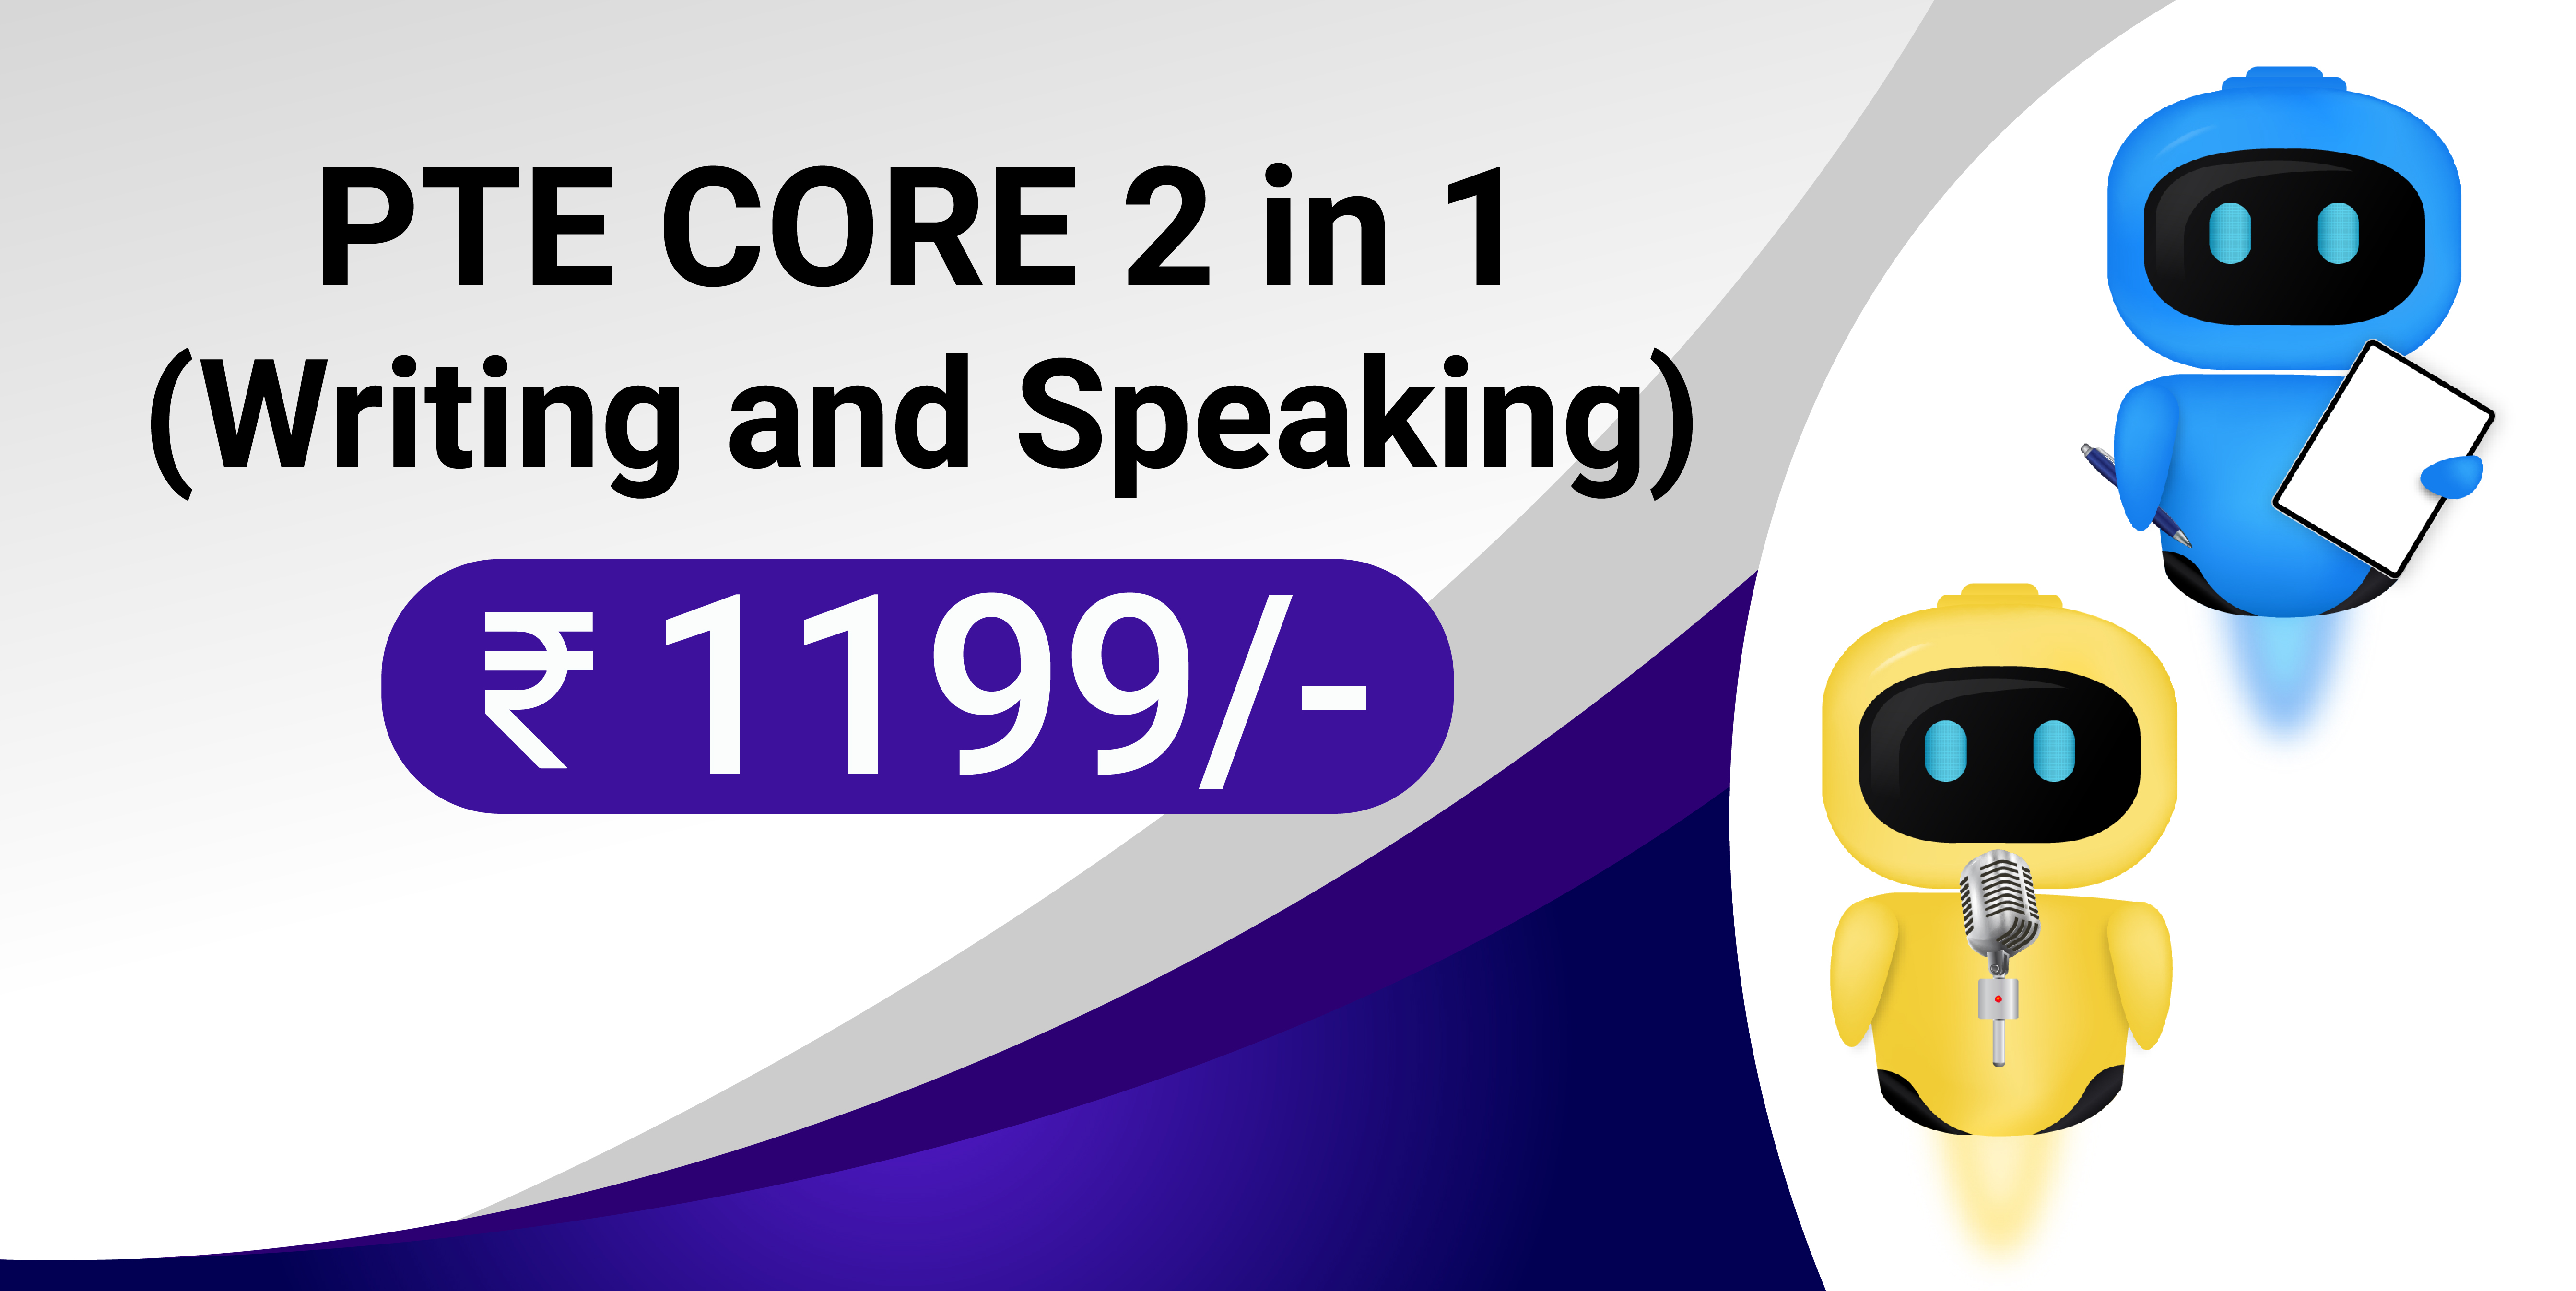 PTE CORE  2 in 1 (Writing and Speaking)